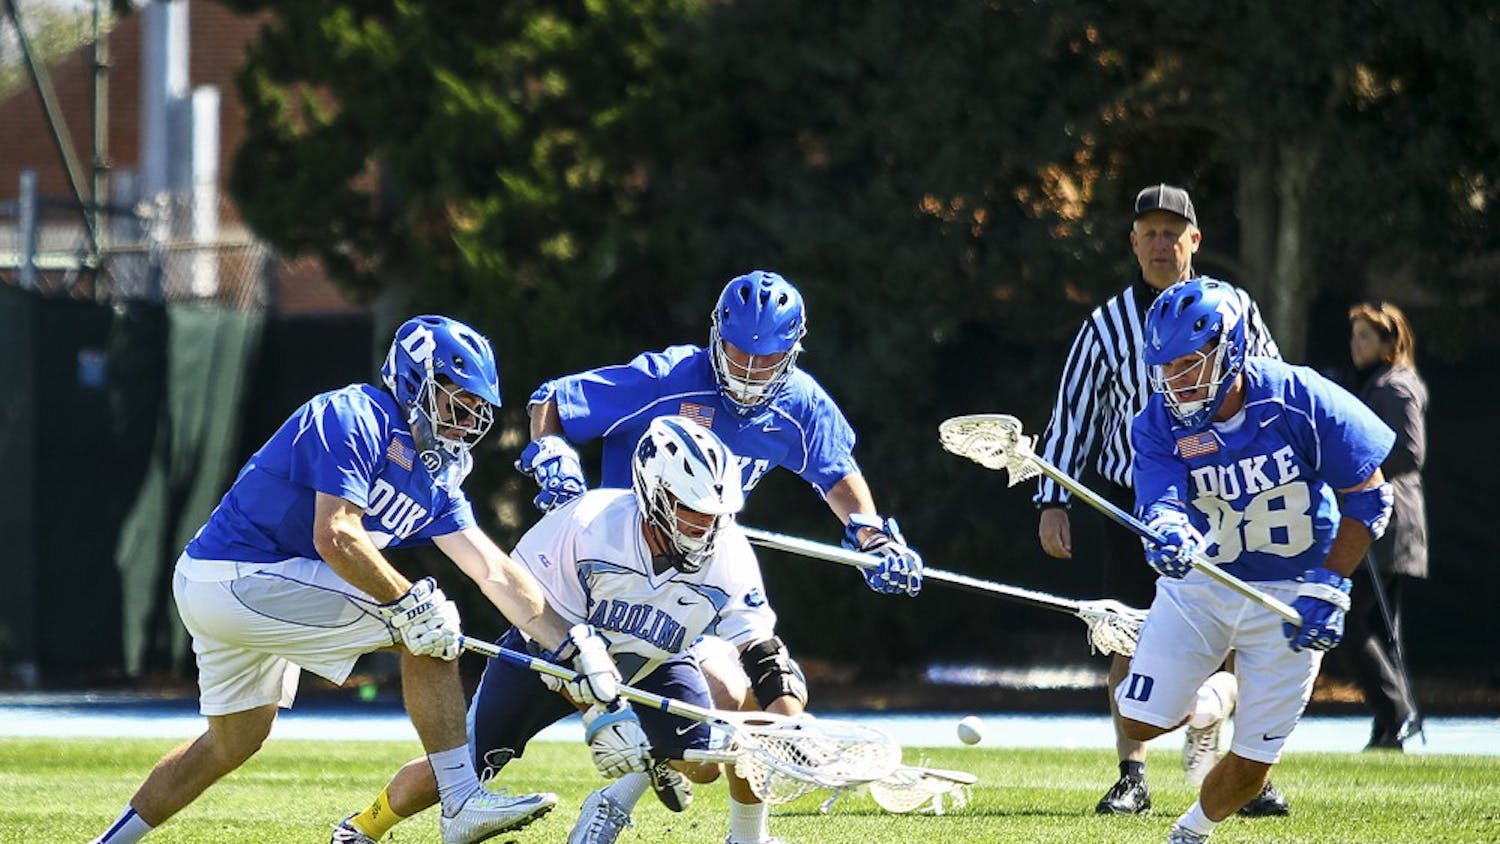 UNC senior attackman Joey Sankey (11) fights for the ball.